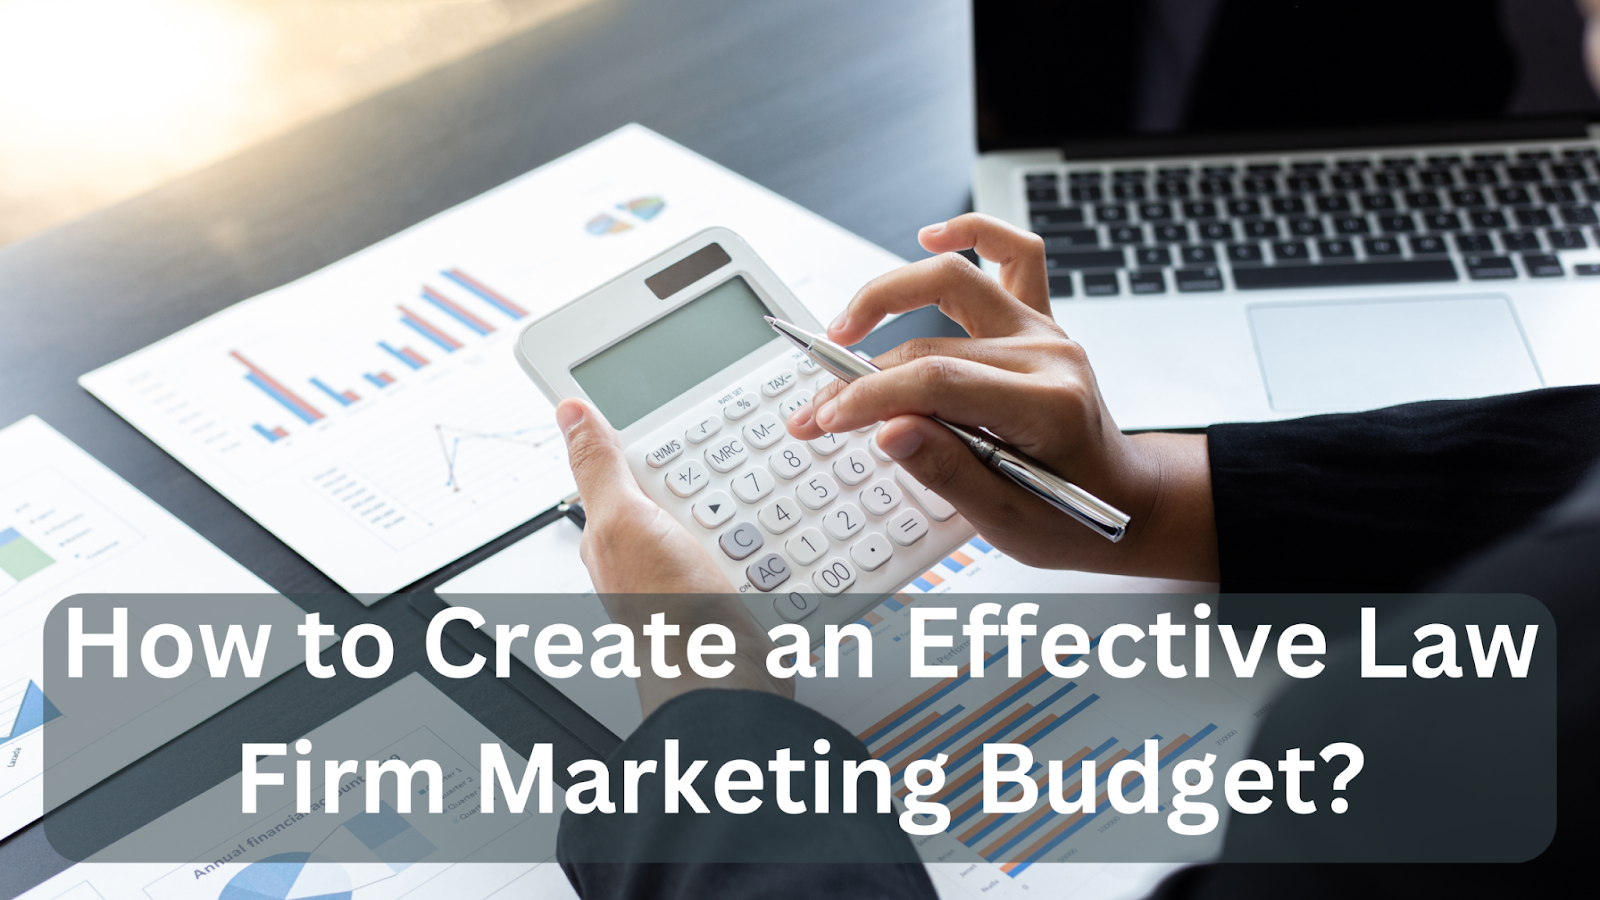 How to Create an Effective Law Firm Marketing Budget?